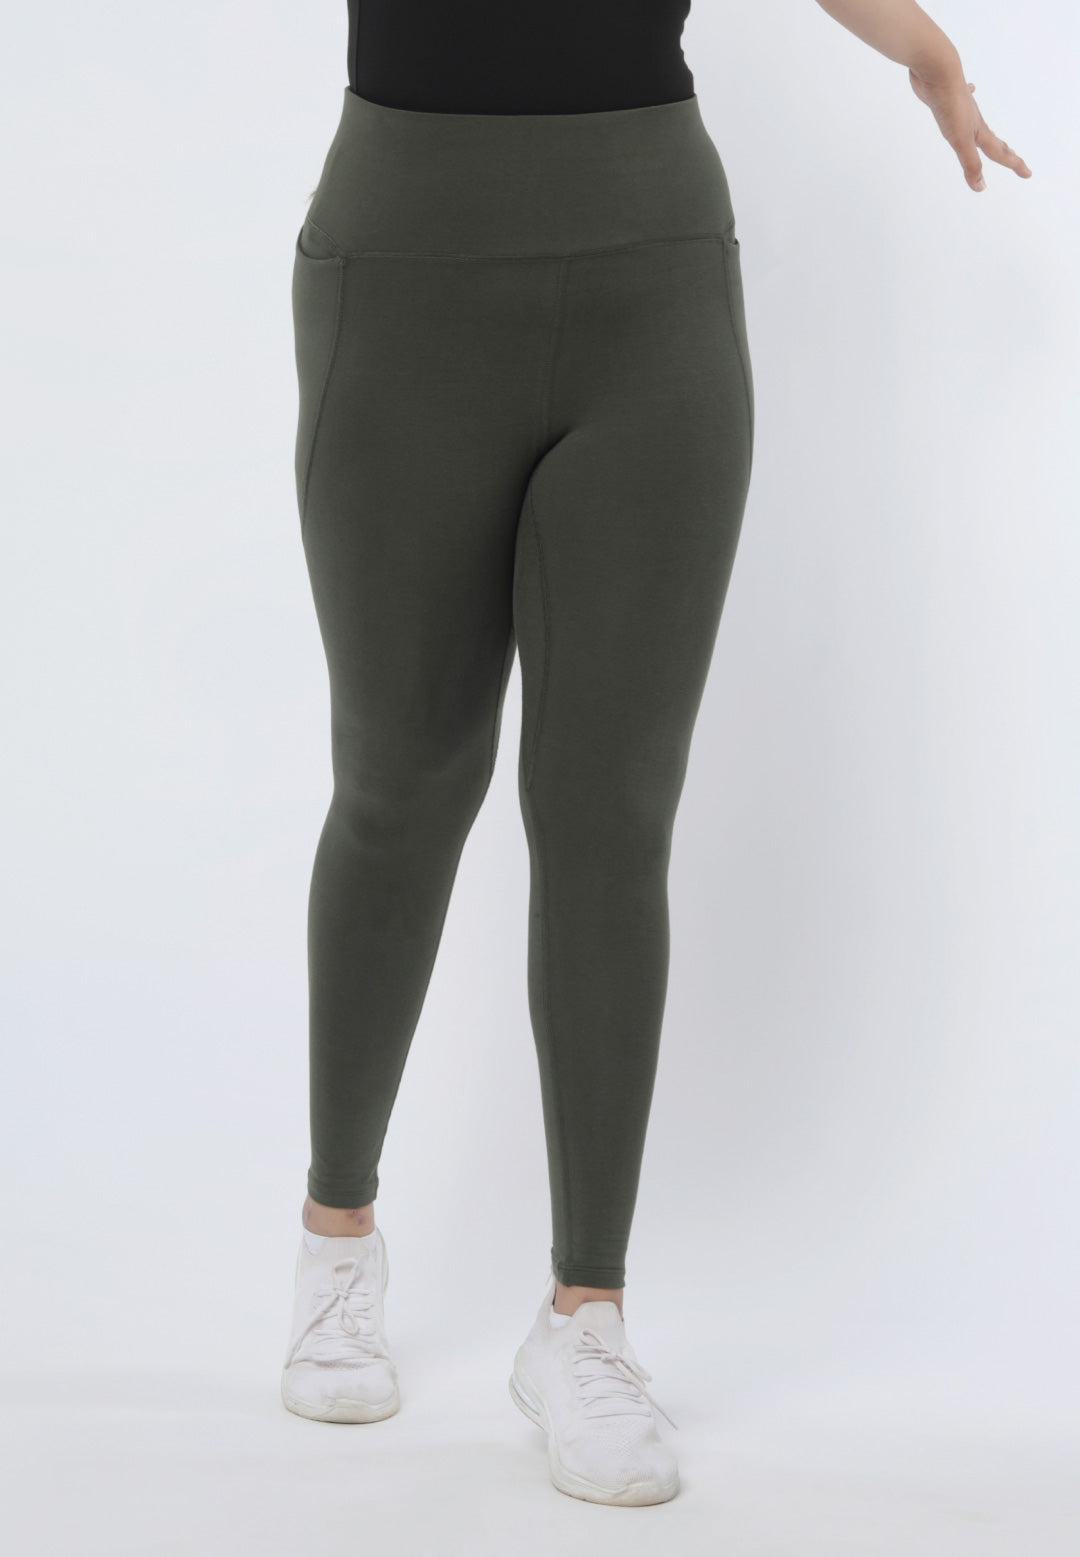 How Should Leggings Fit for Maximum Comfort and Style? - Felina